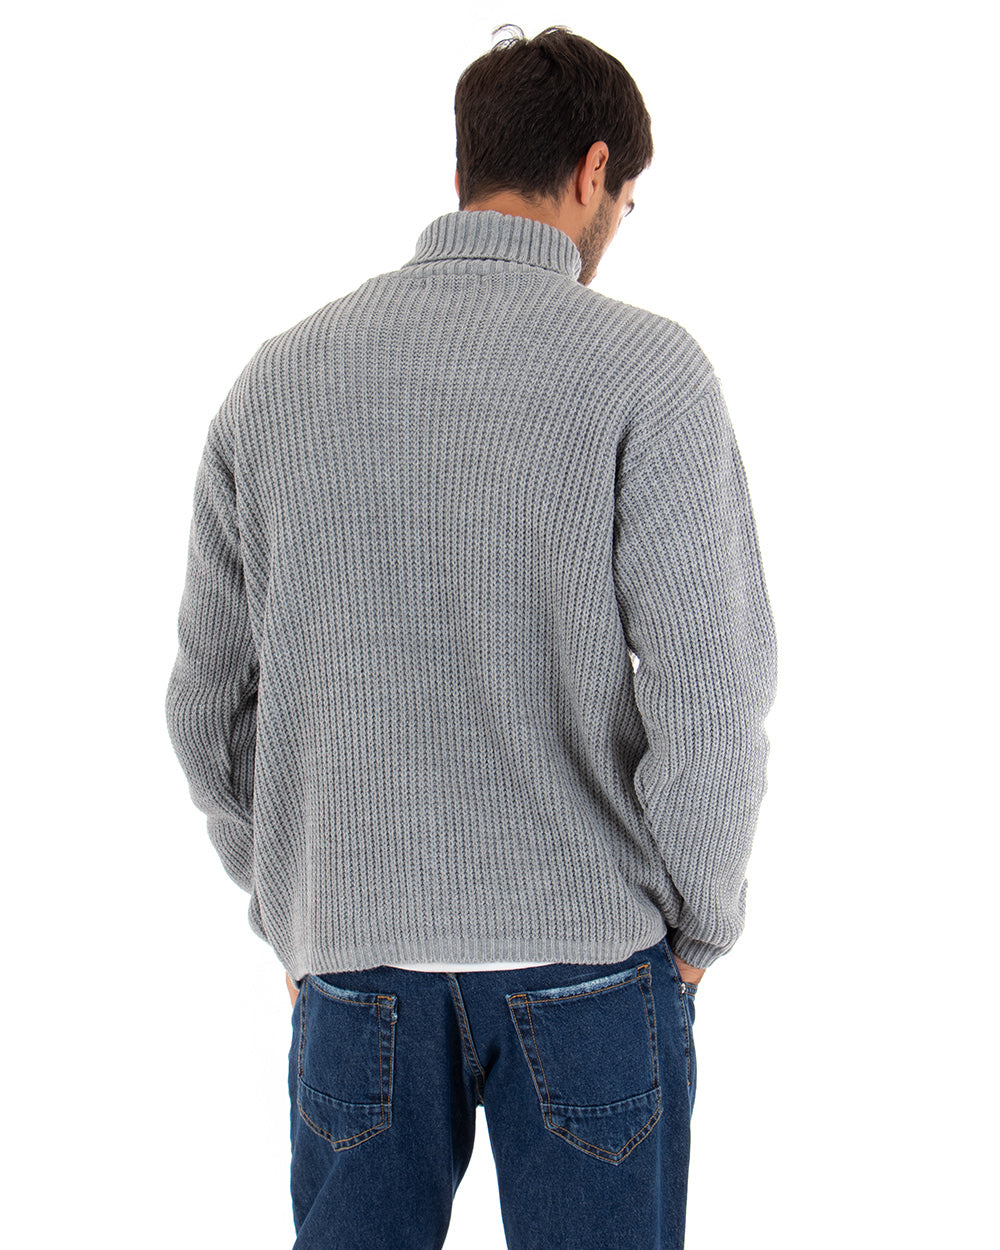 Men's High Neck Cable Sweater Solid Color Gray Long Sleeves Pullover GIOSAL